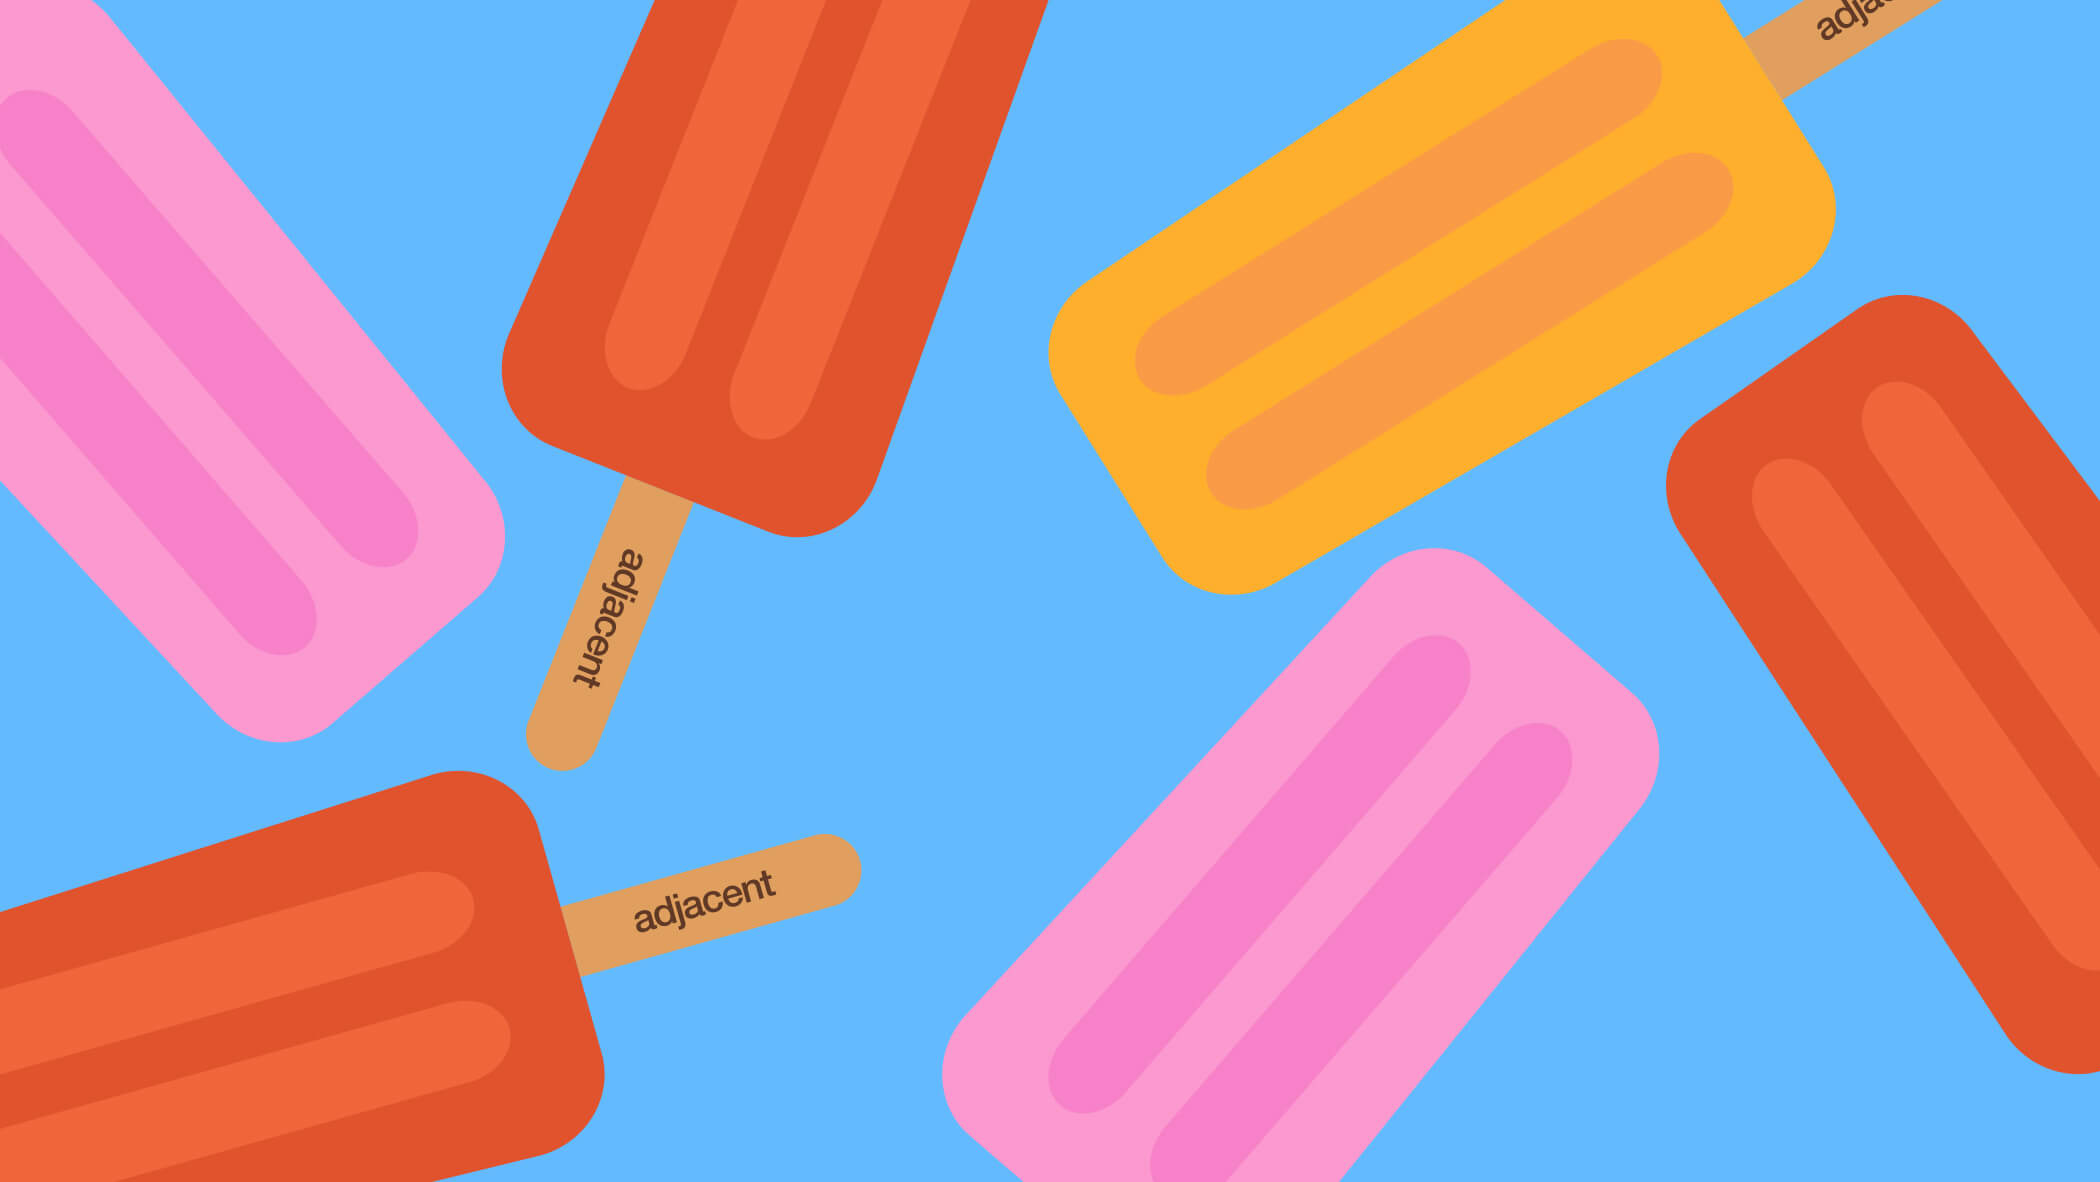 illustrated popsicles with adjacent's logo on the stick